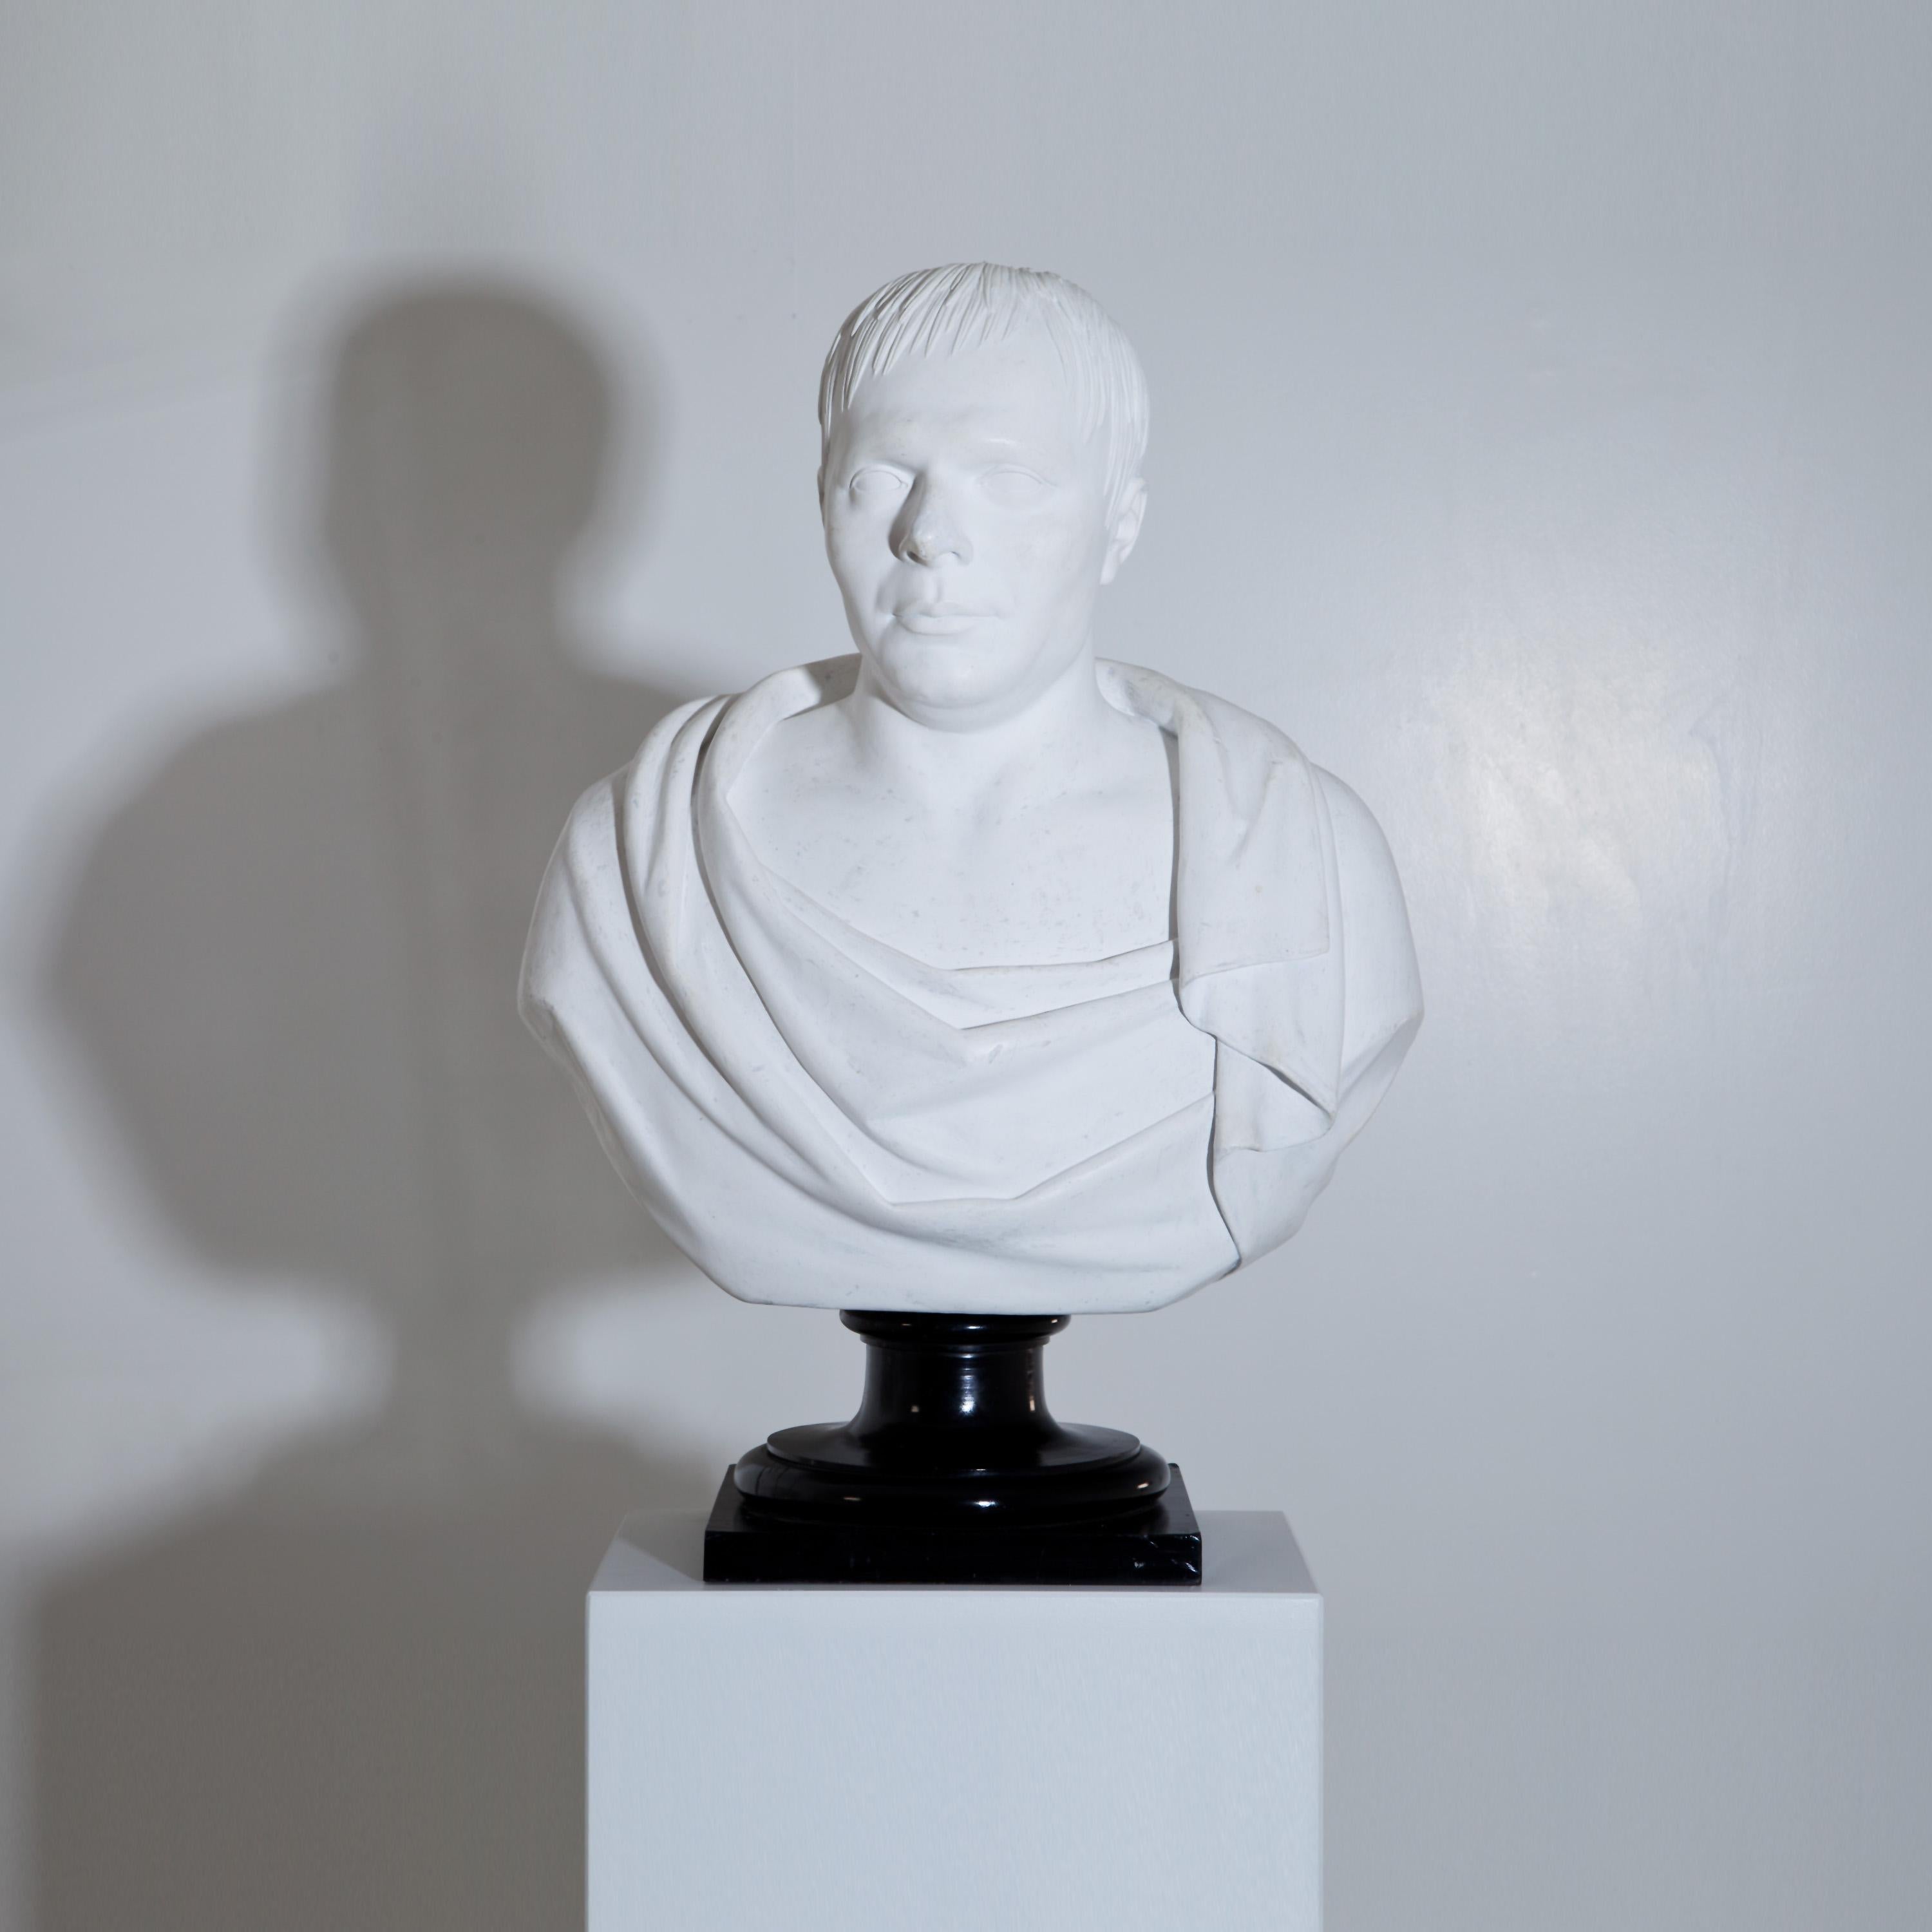 Mid-19th Century Neoclassical Plaster Portrait Bust, Signed A. Frederich, Dated 1843 For Sale